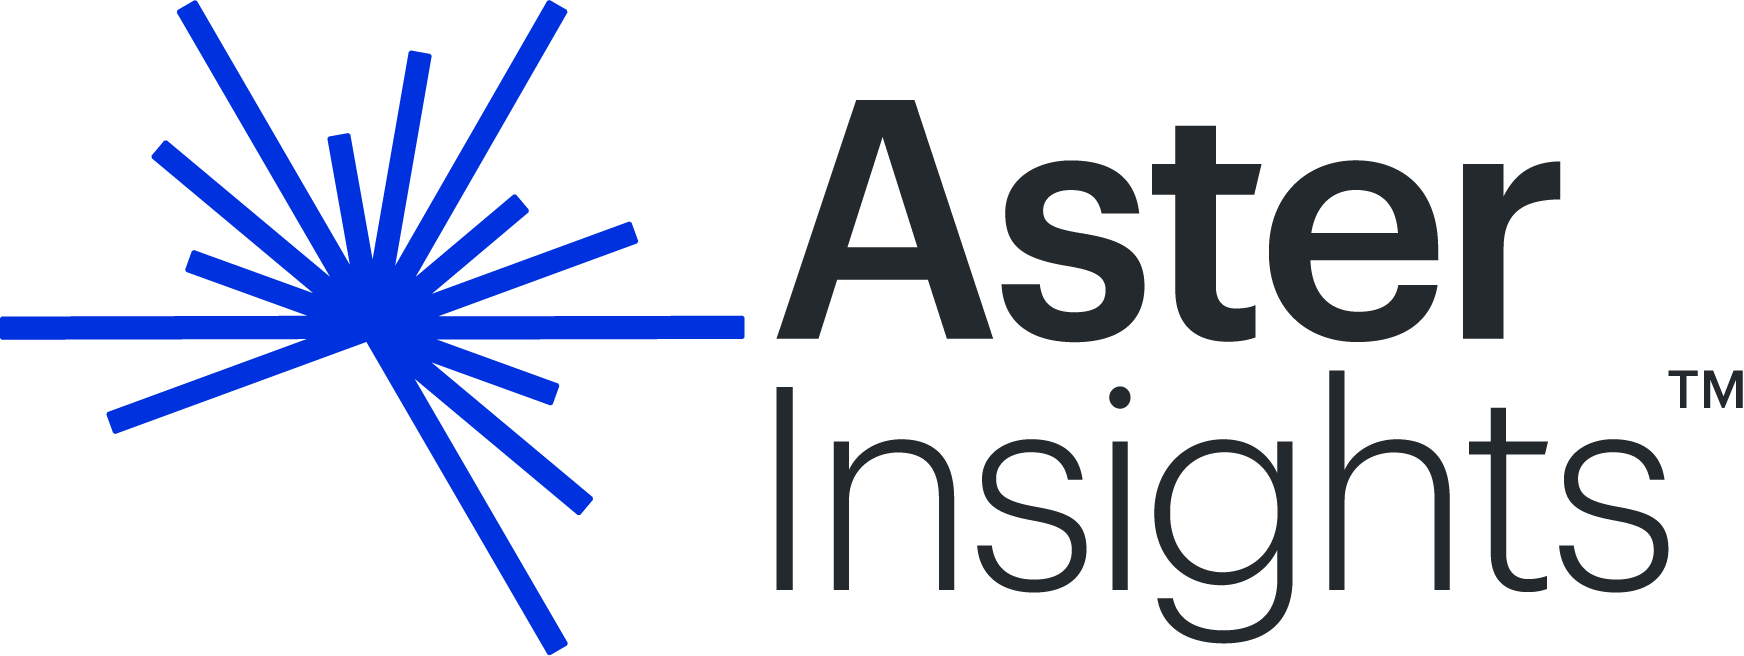 Aster Insights